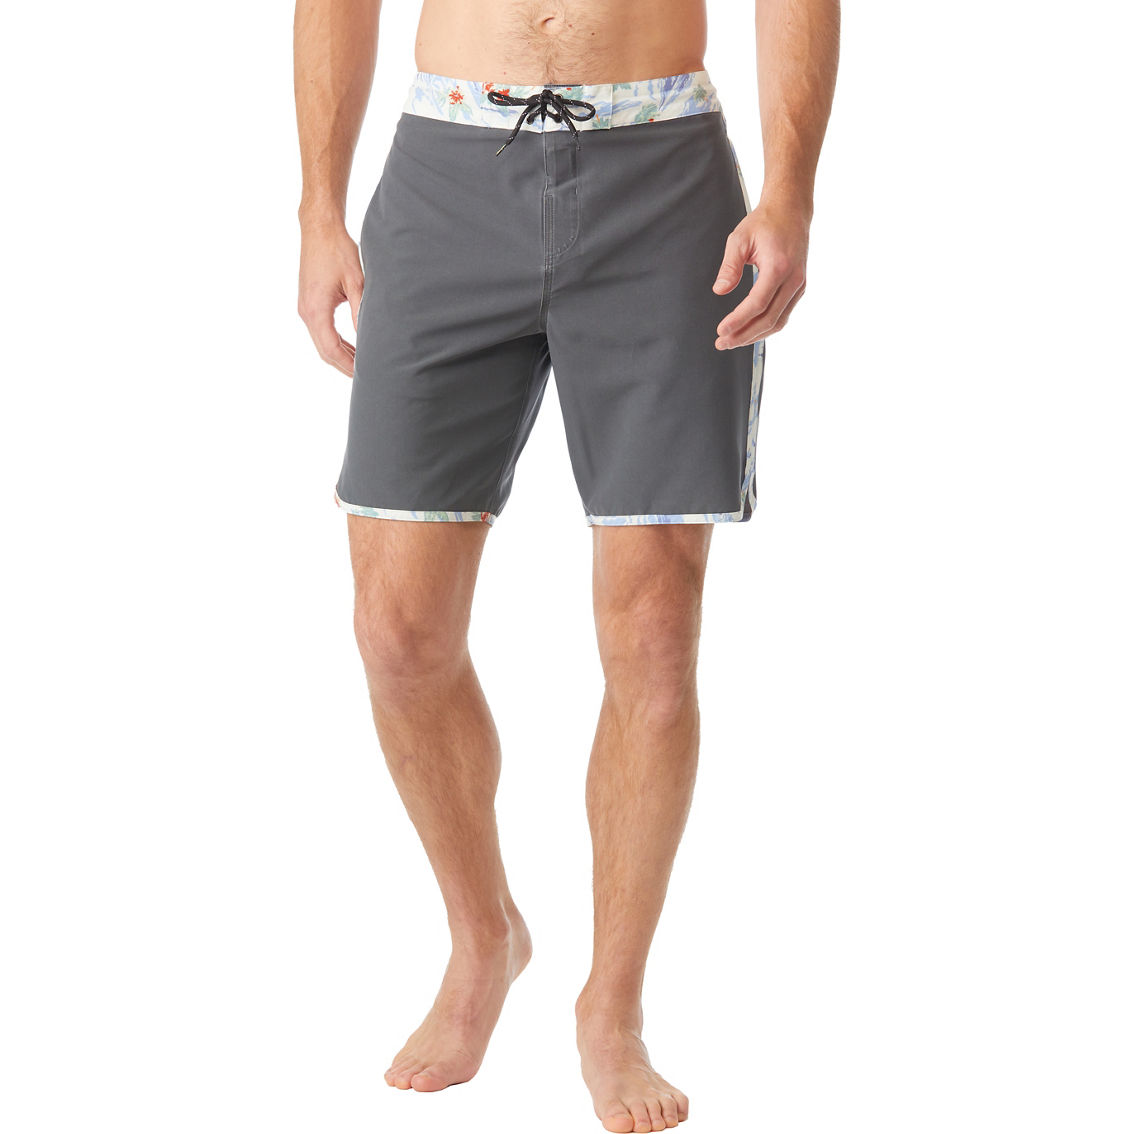 Body Glove Relaxed Fit Swim Scallop Board Shorts - Image 5 of 5